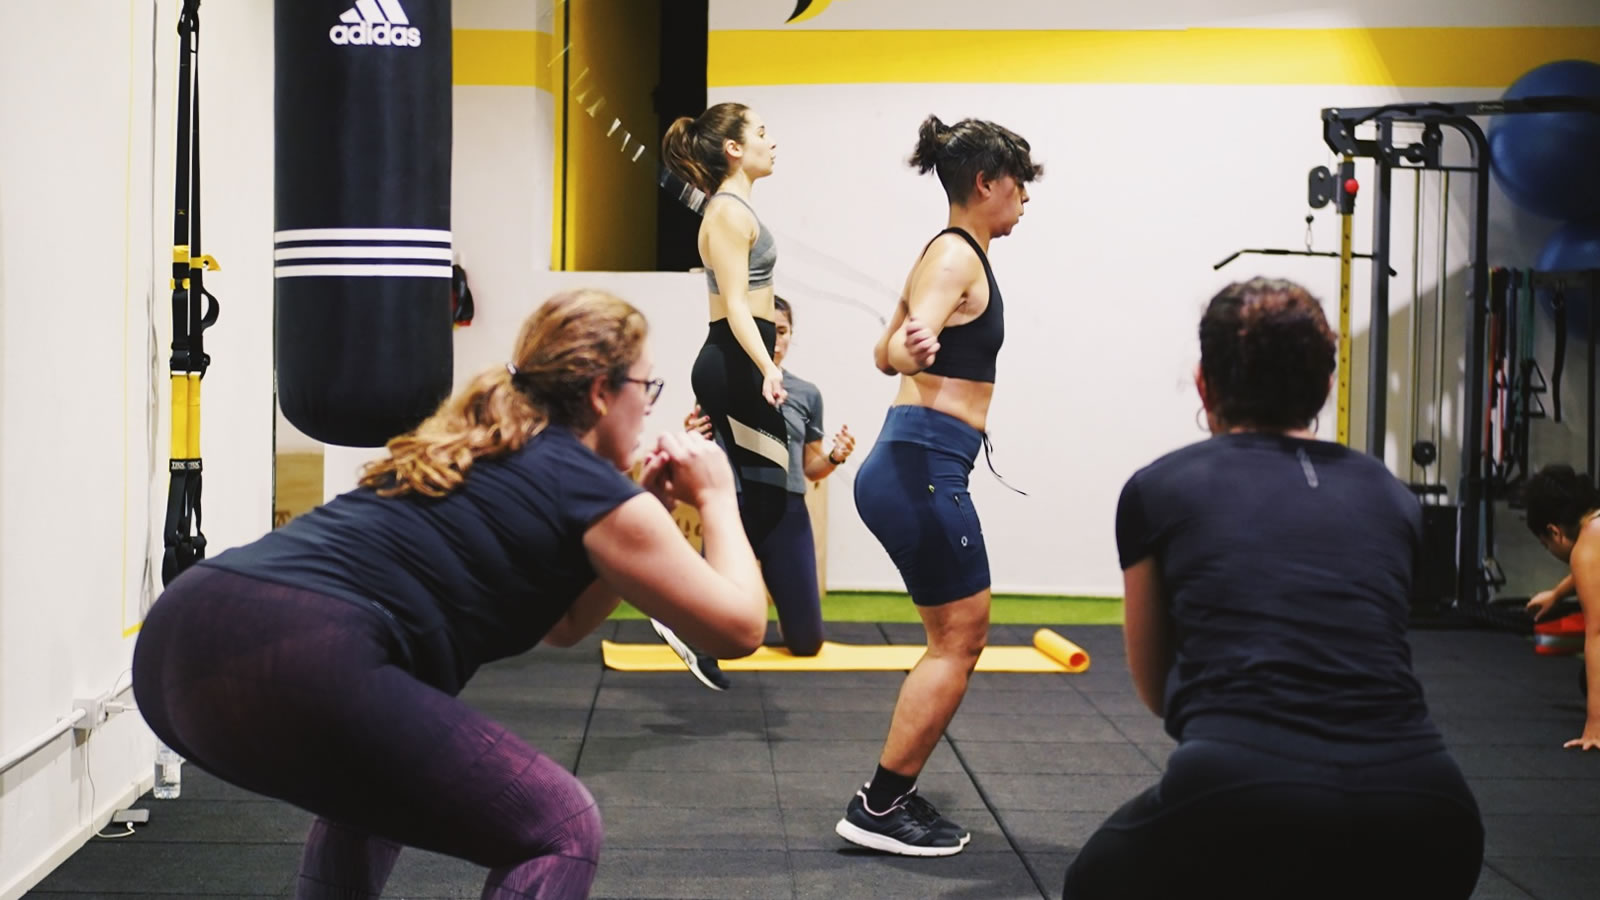 Clases online de Hiit para mujeres fitness | FitLovas